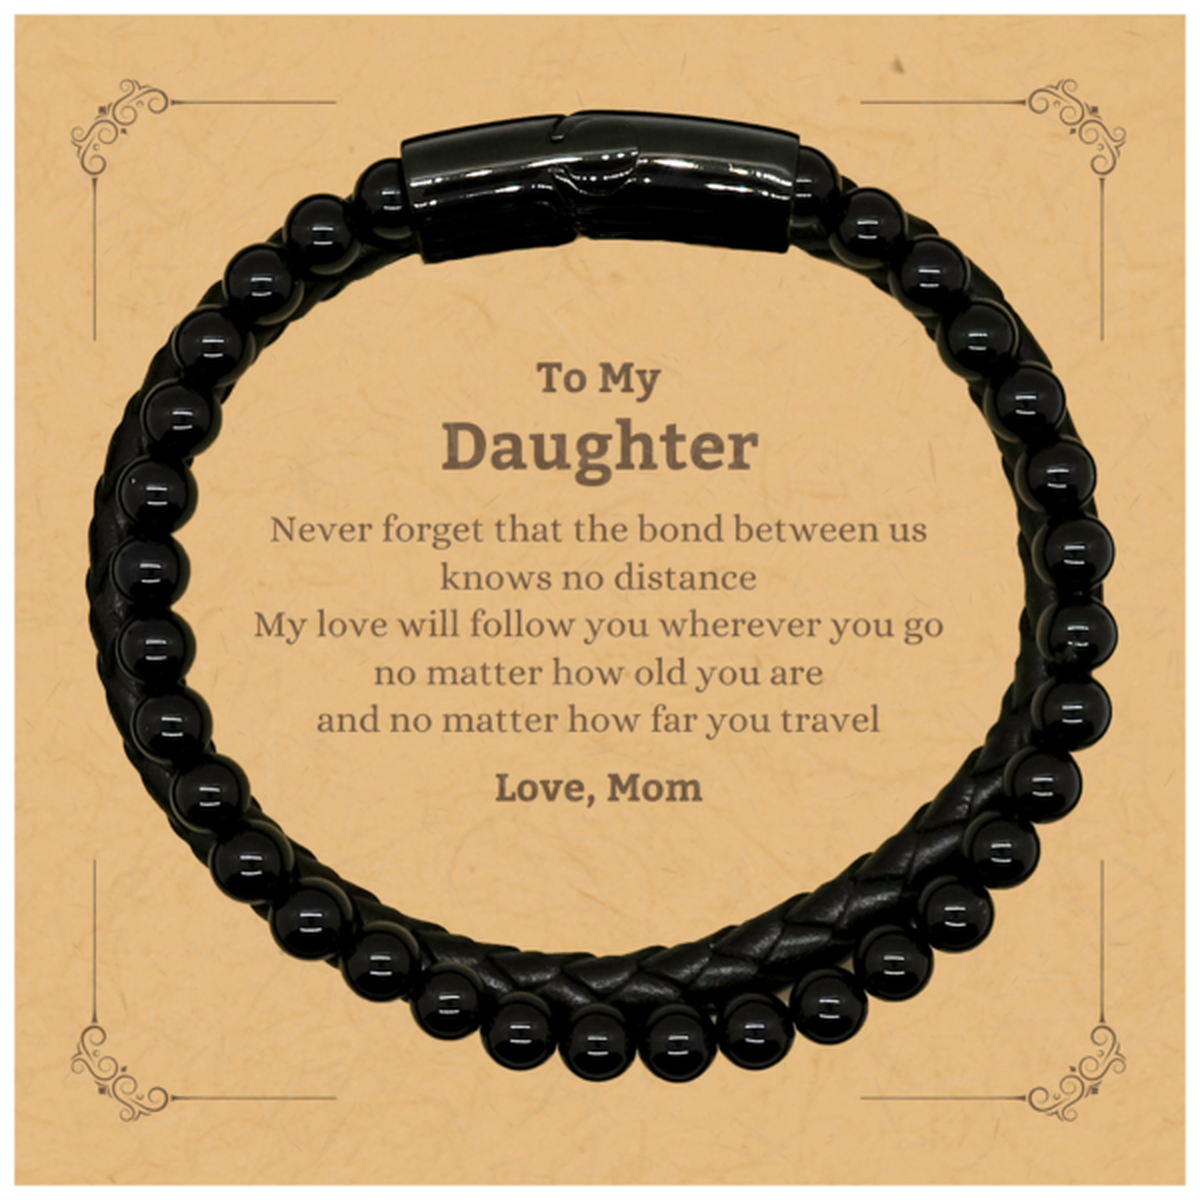 Daughter Birthday Gifts from Mom, Adjustable Stone Leather Bracelets for Daughter Christmas Graduation Unique Gifts Daughter Never forget that the bond between us knows no distance. Love, Mom